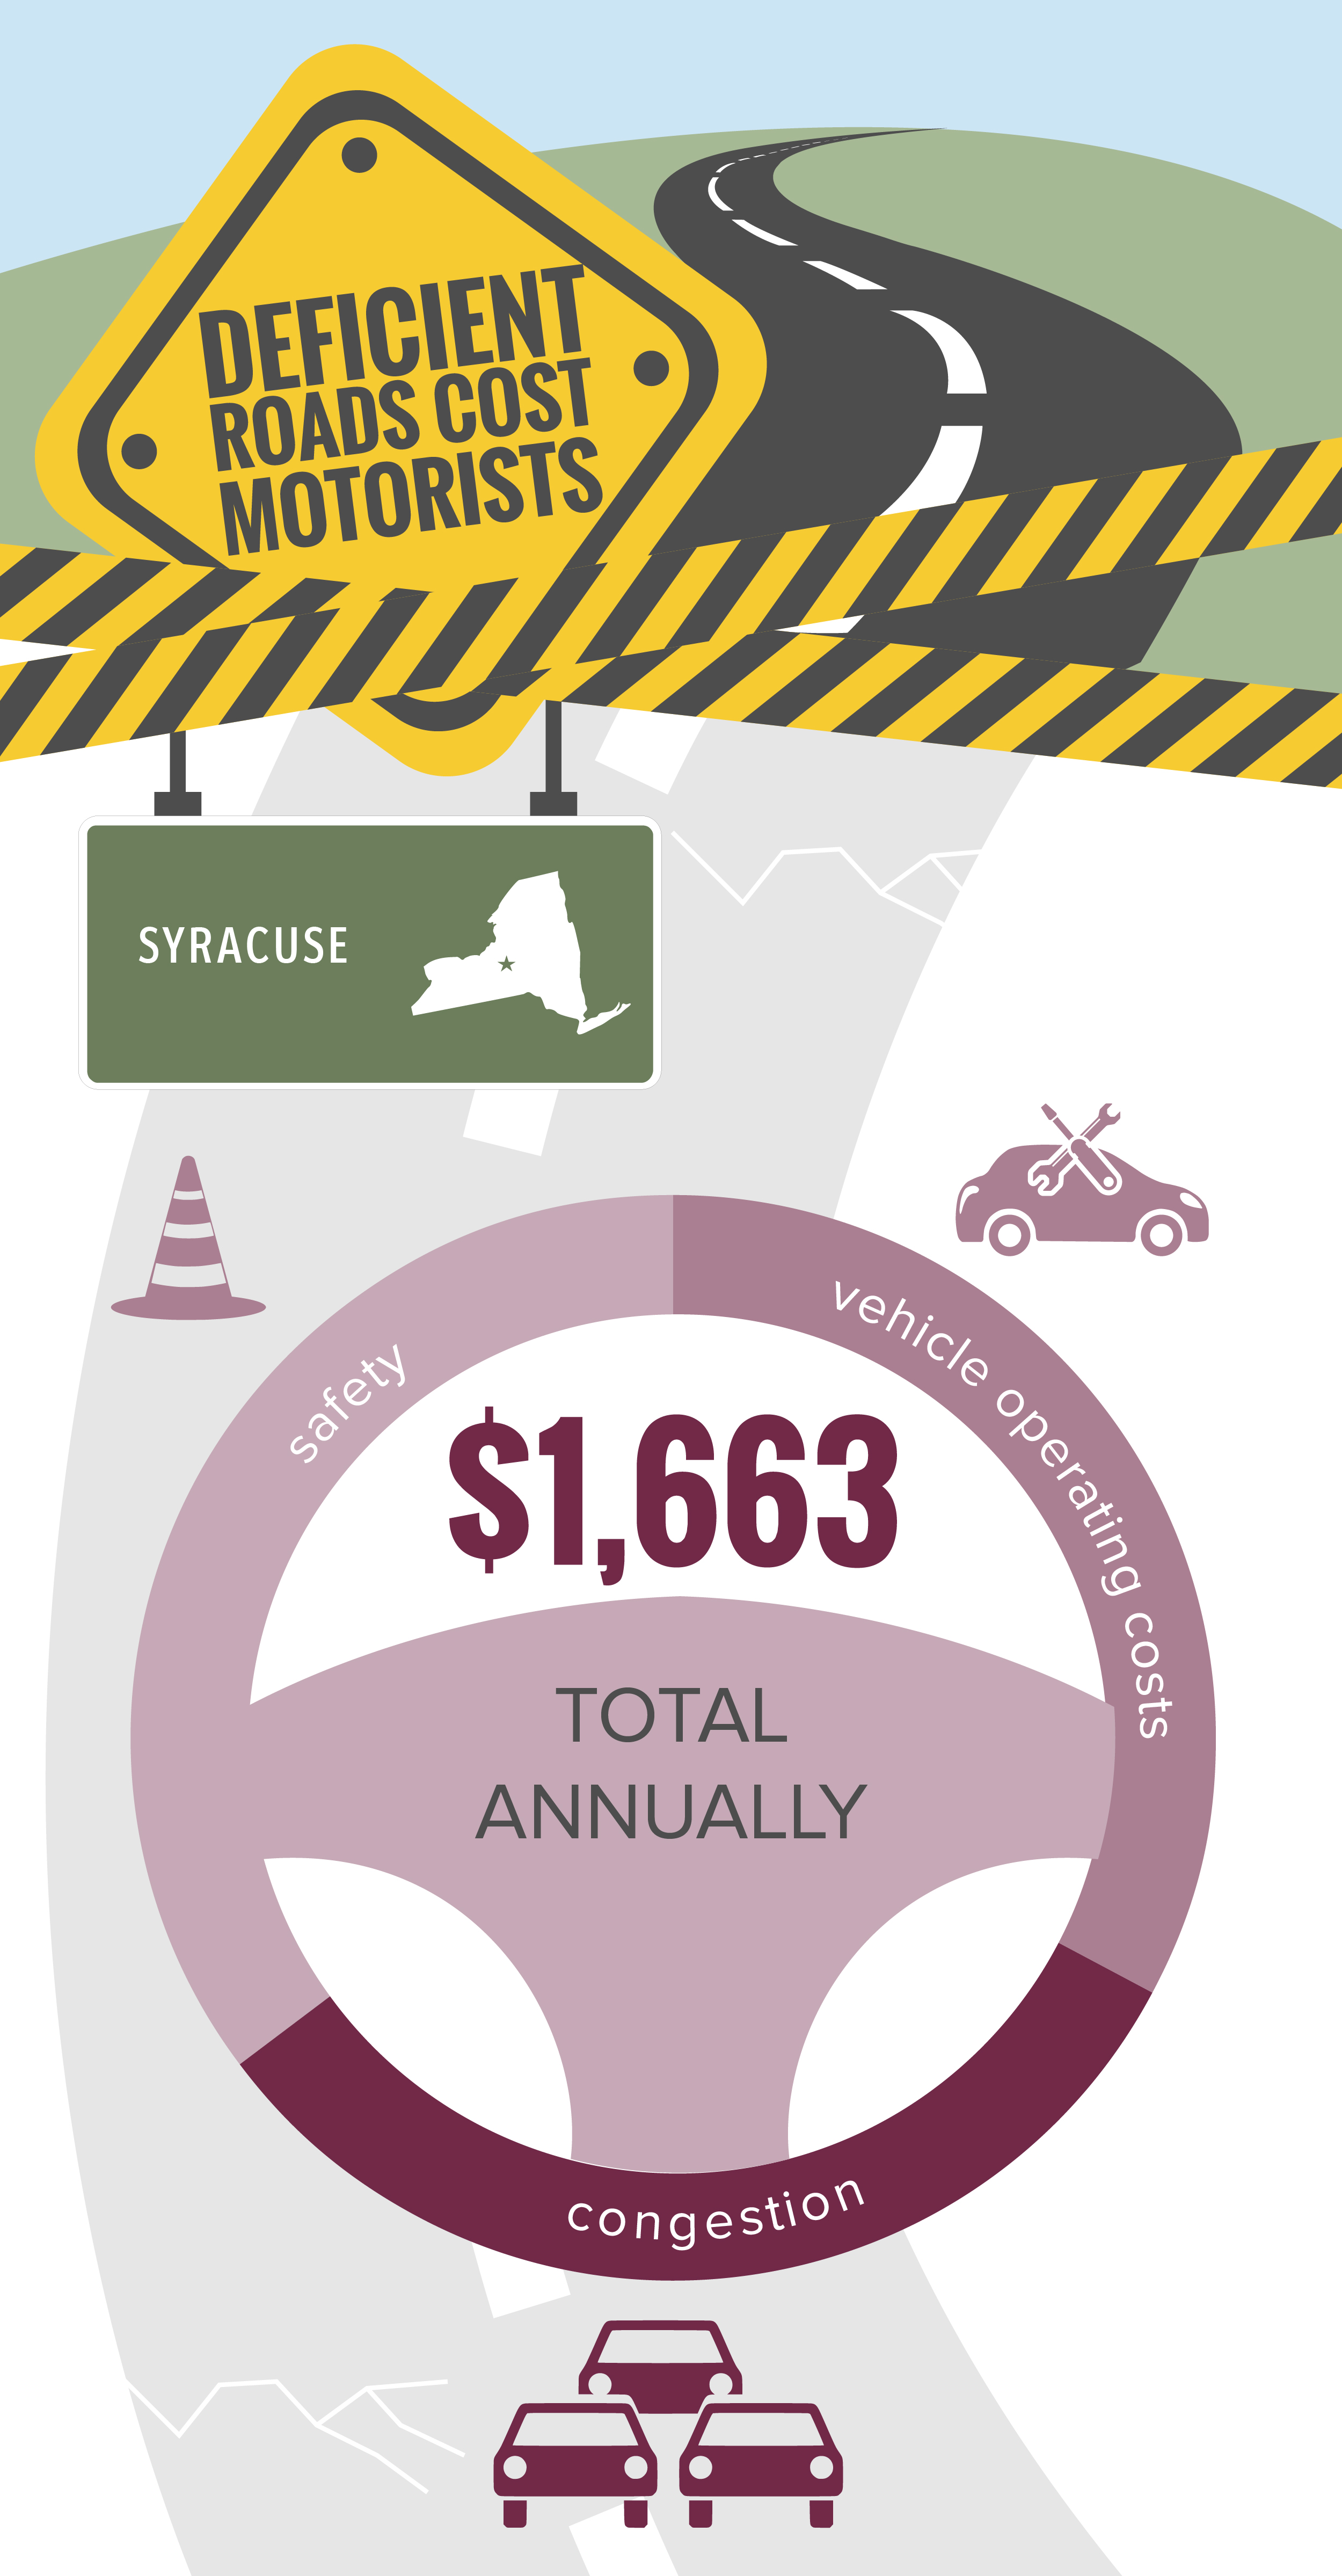 Syracuse Deficient Roads Infographic